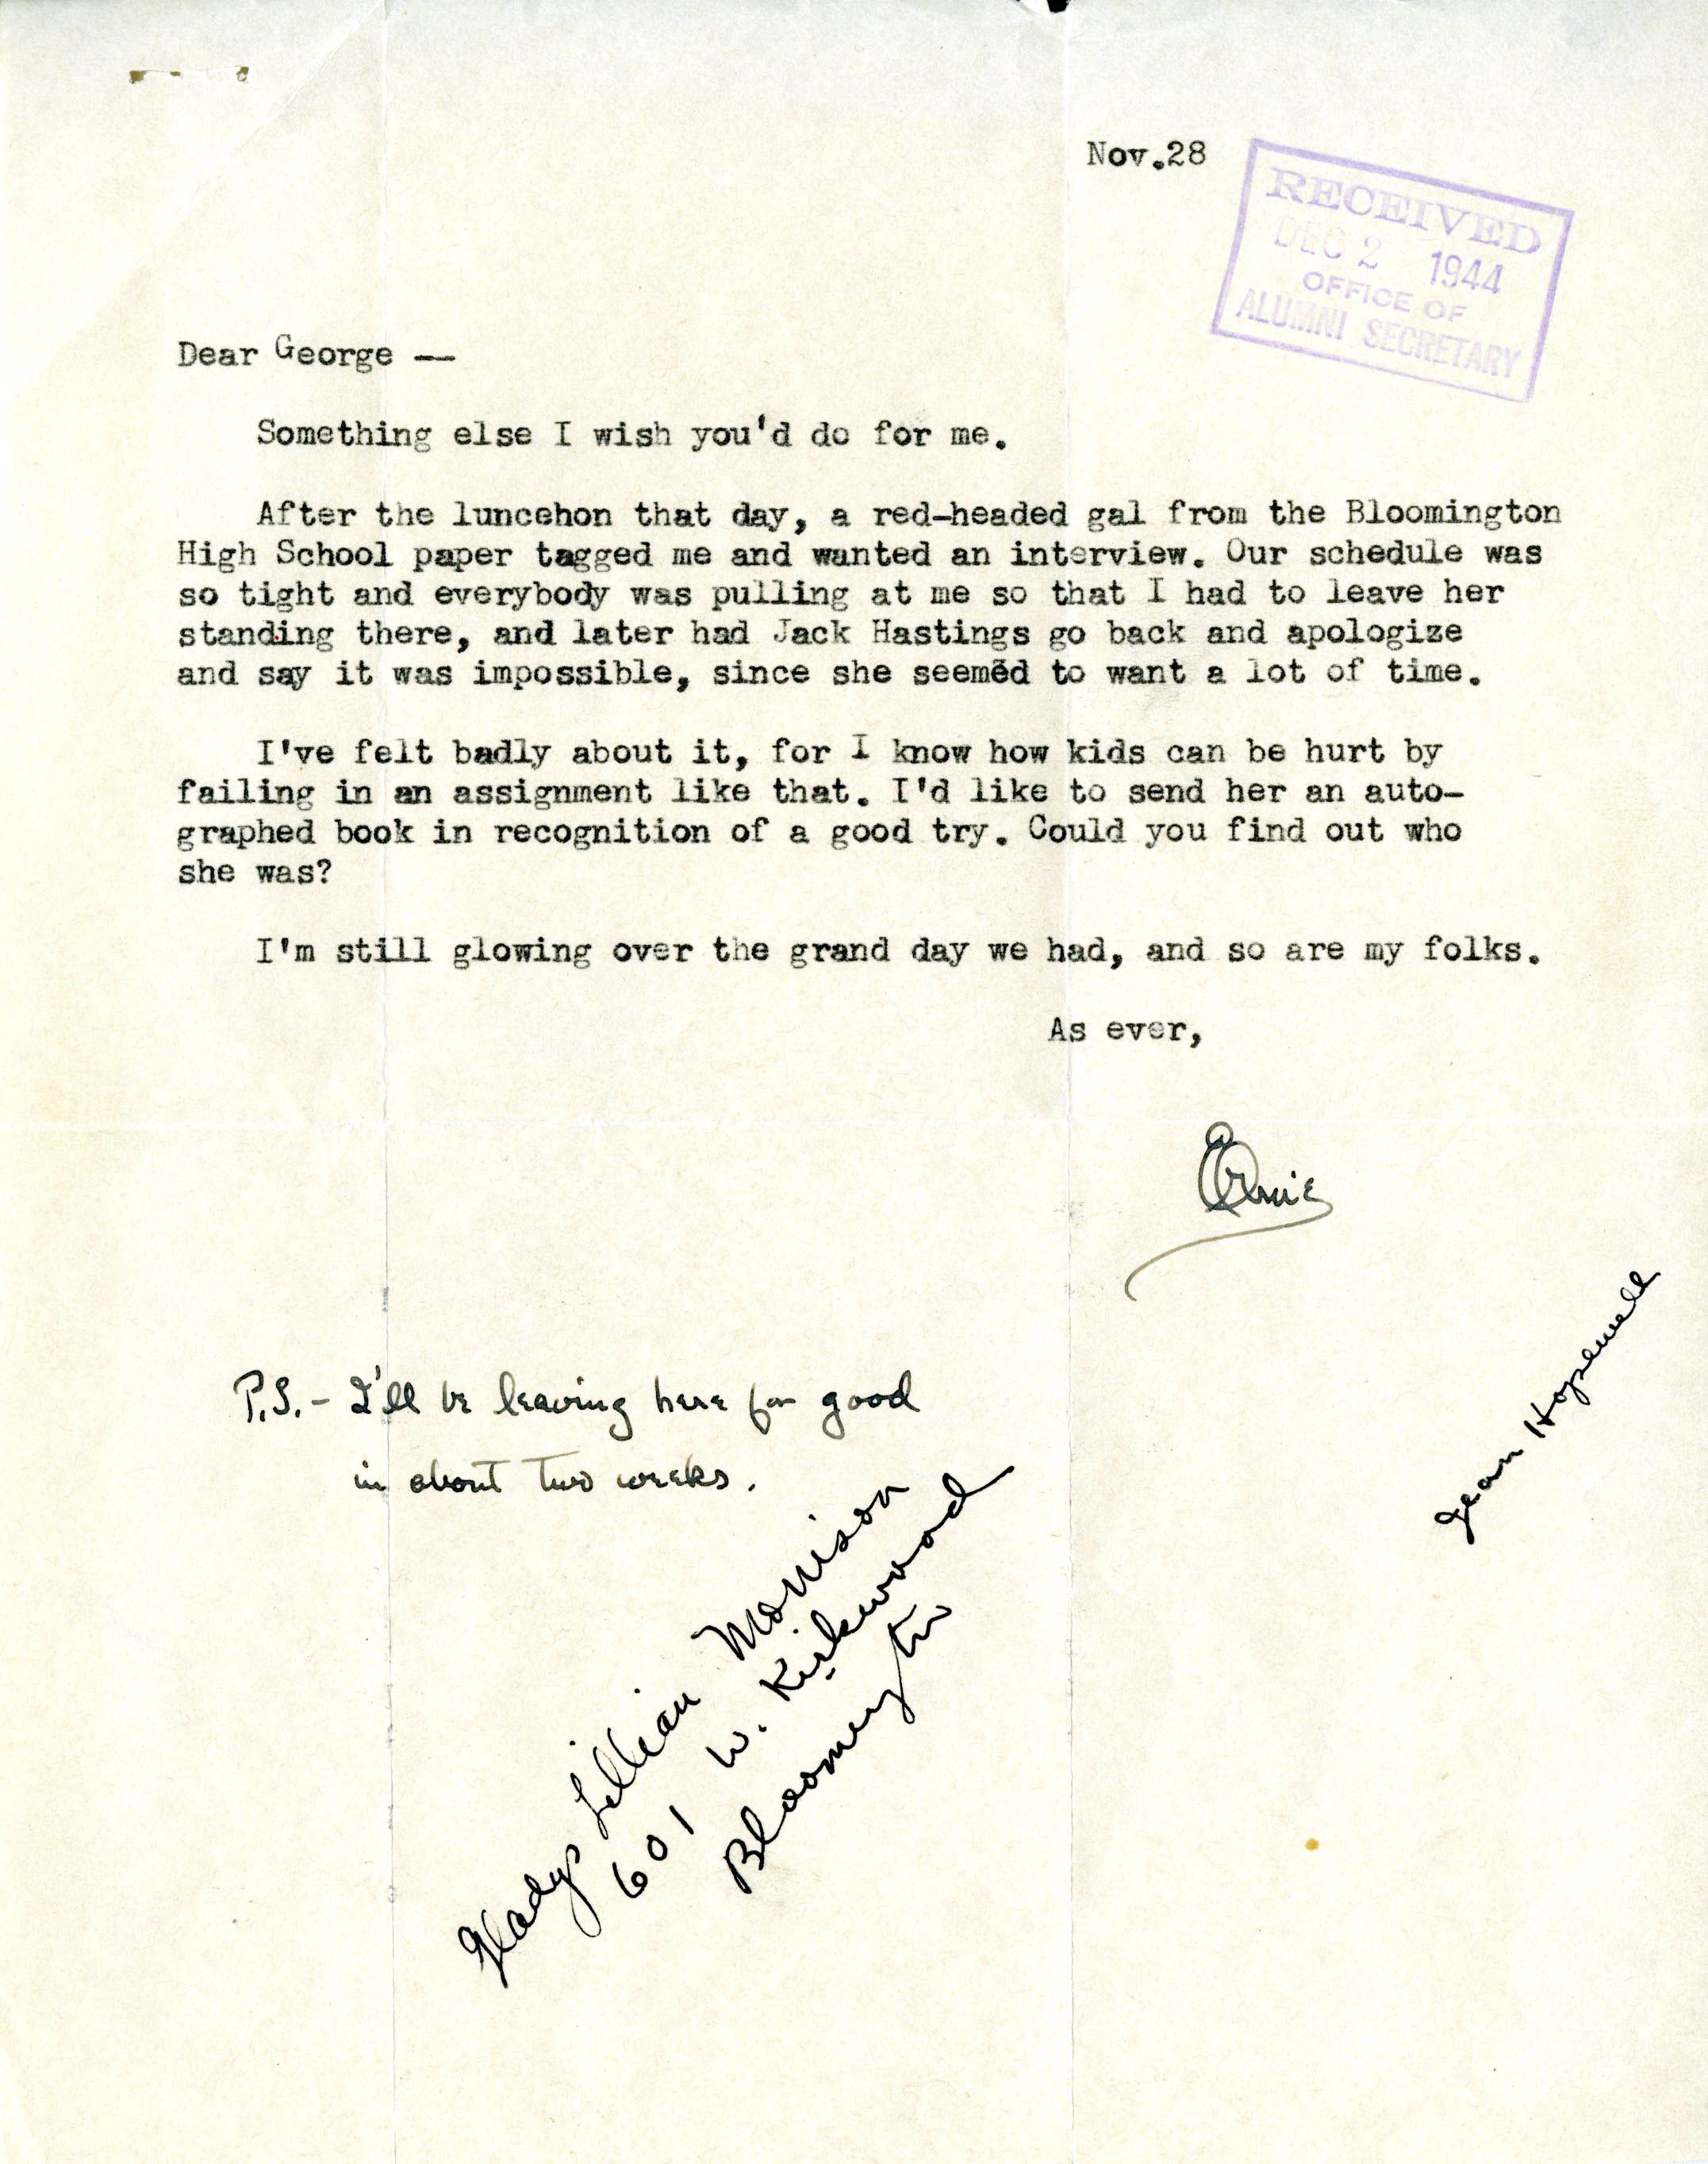 Scan of original letter from Ernie Pyle to George "Dixie" Heighway, November 28, 1944